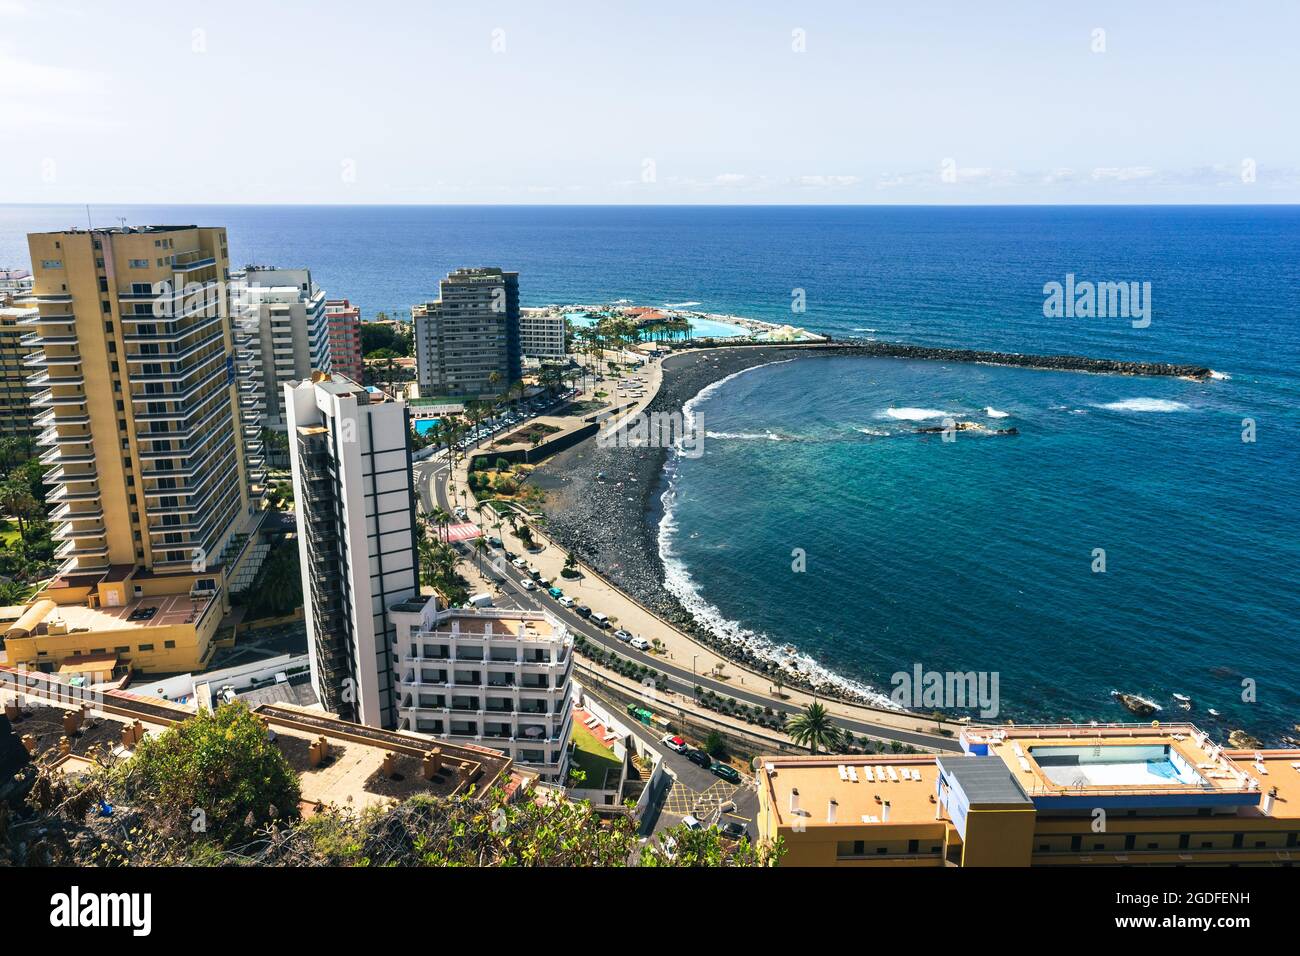 A view on the city from a height of observation deck: Mirador La Paz.  Puerto de la Cruz, Tenerife, Canary Islands, Spain. Stock Photo